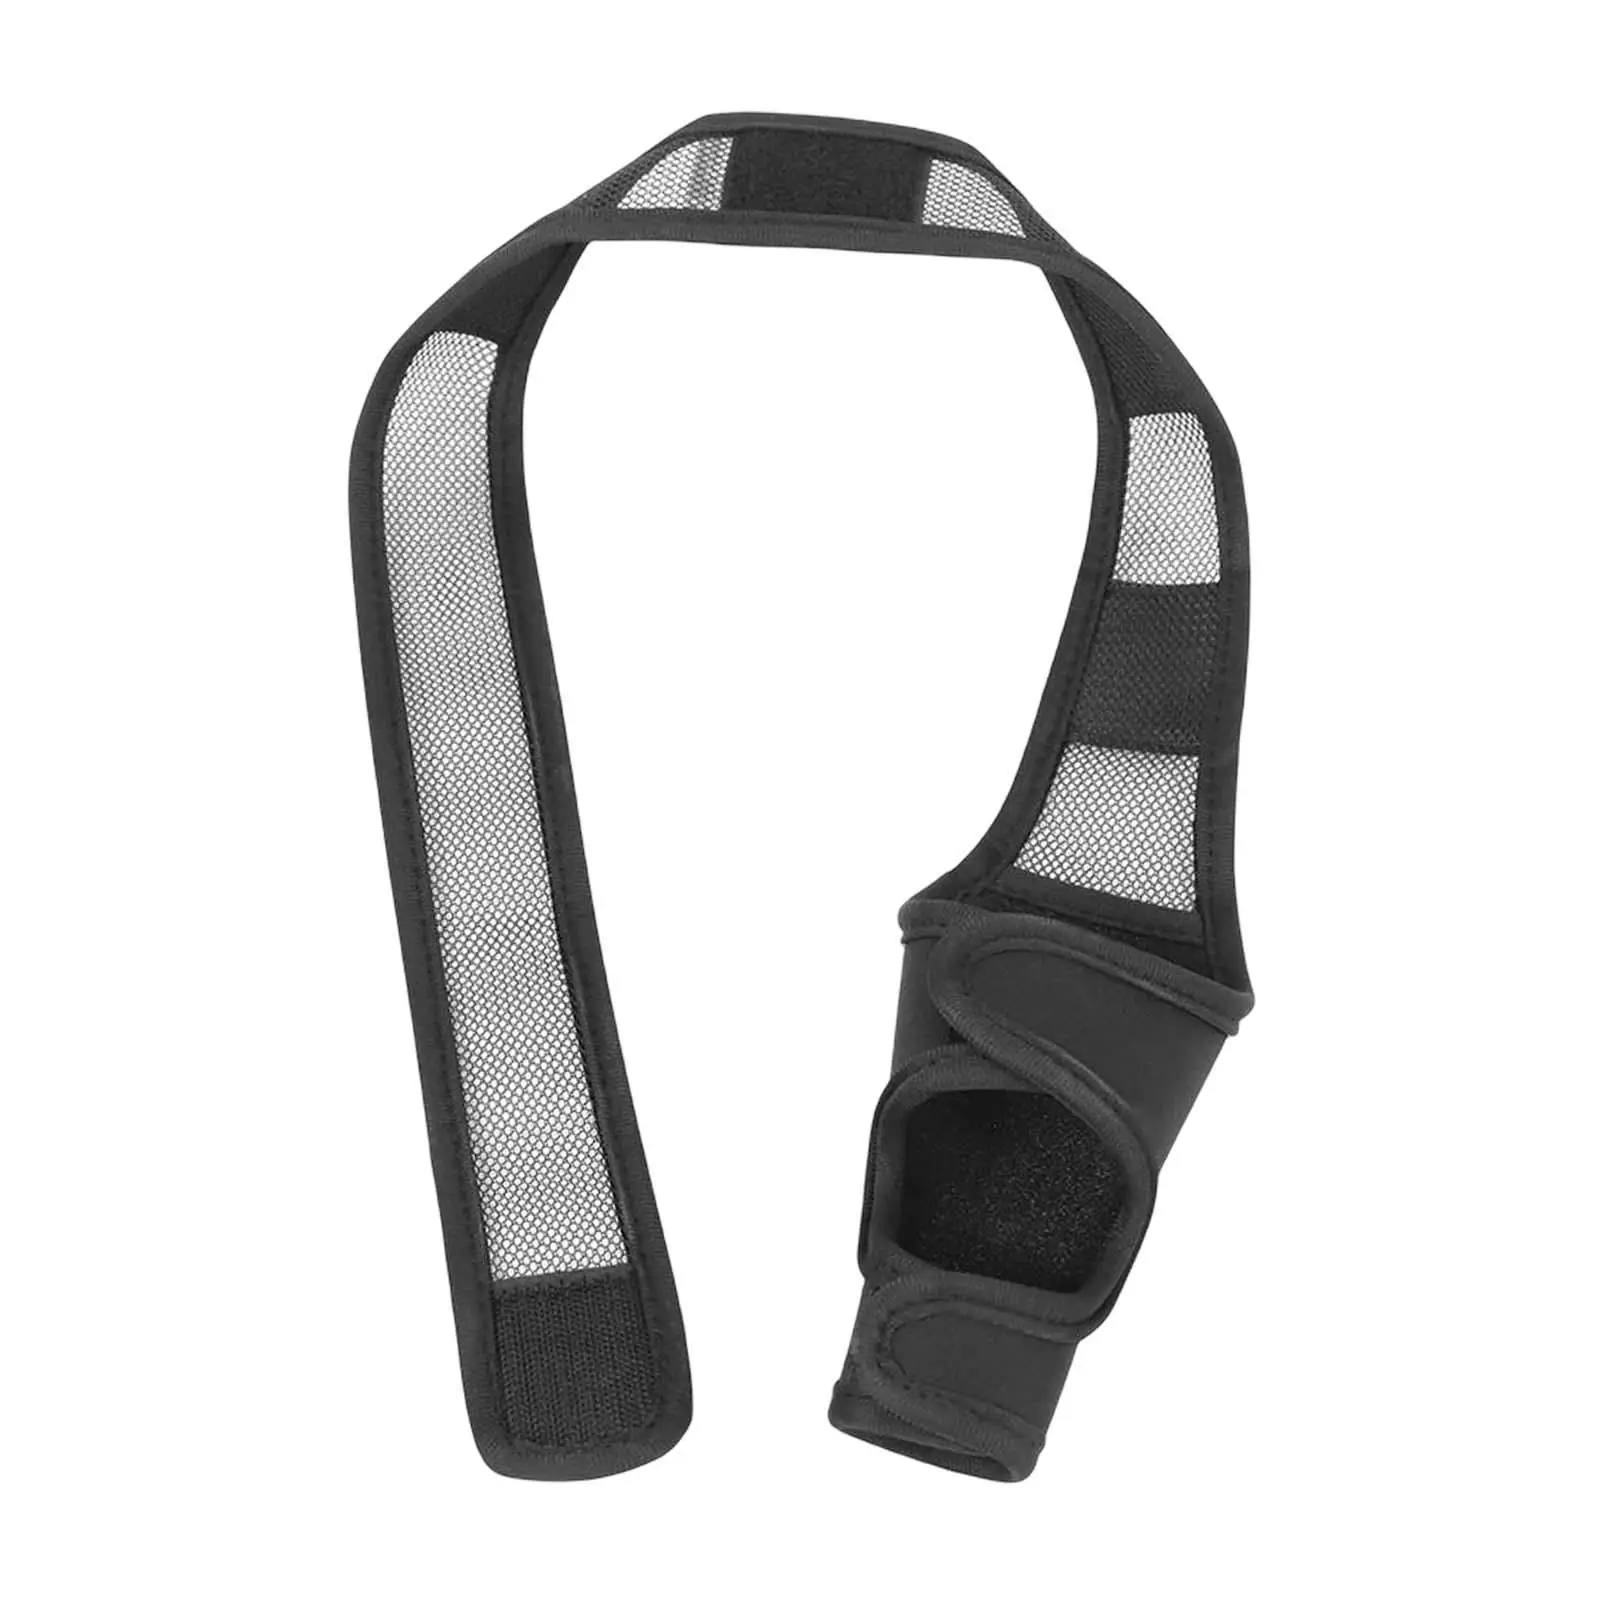 Dog Knee Brace Auxiliary Strap Pets Knee Brace Helper Canine Aid Protector Joint Support for Hind Leg Cruciate Ligament Injuries